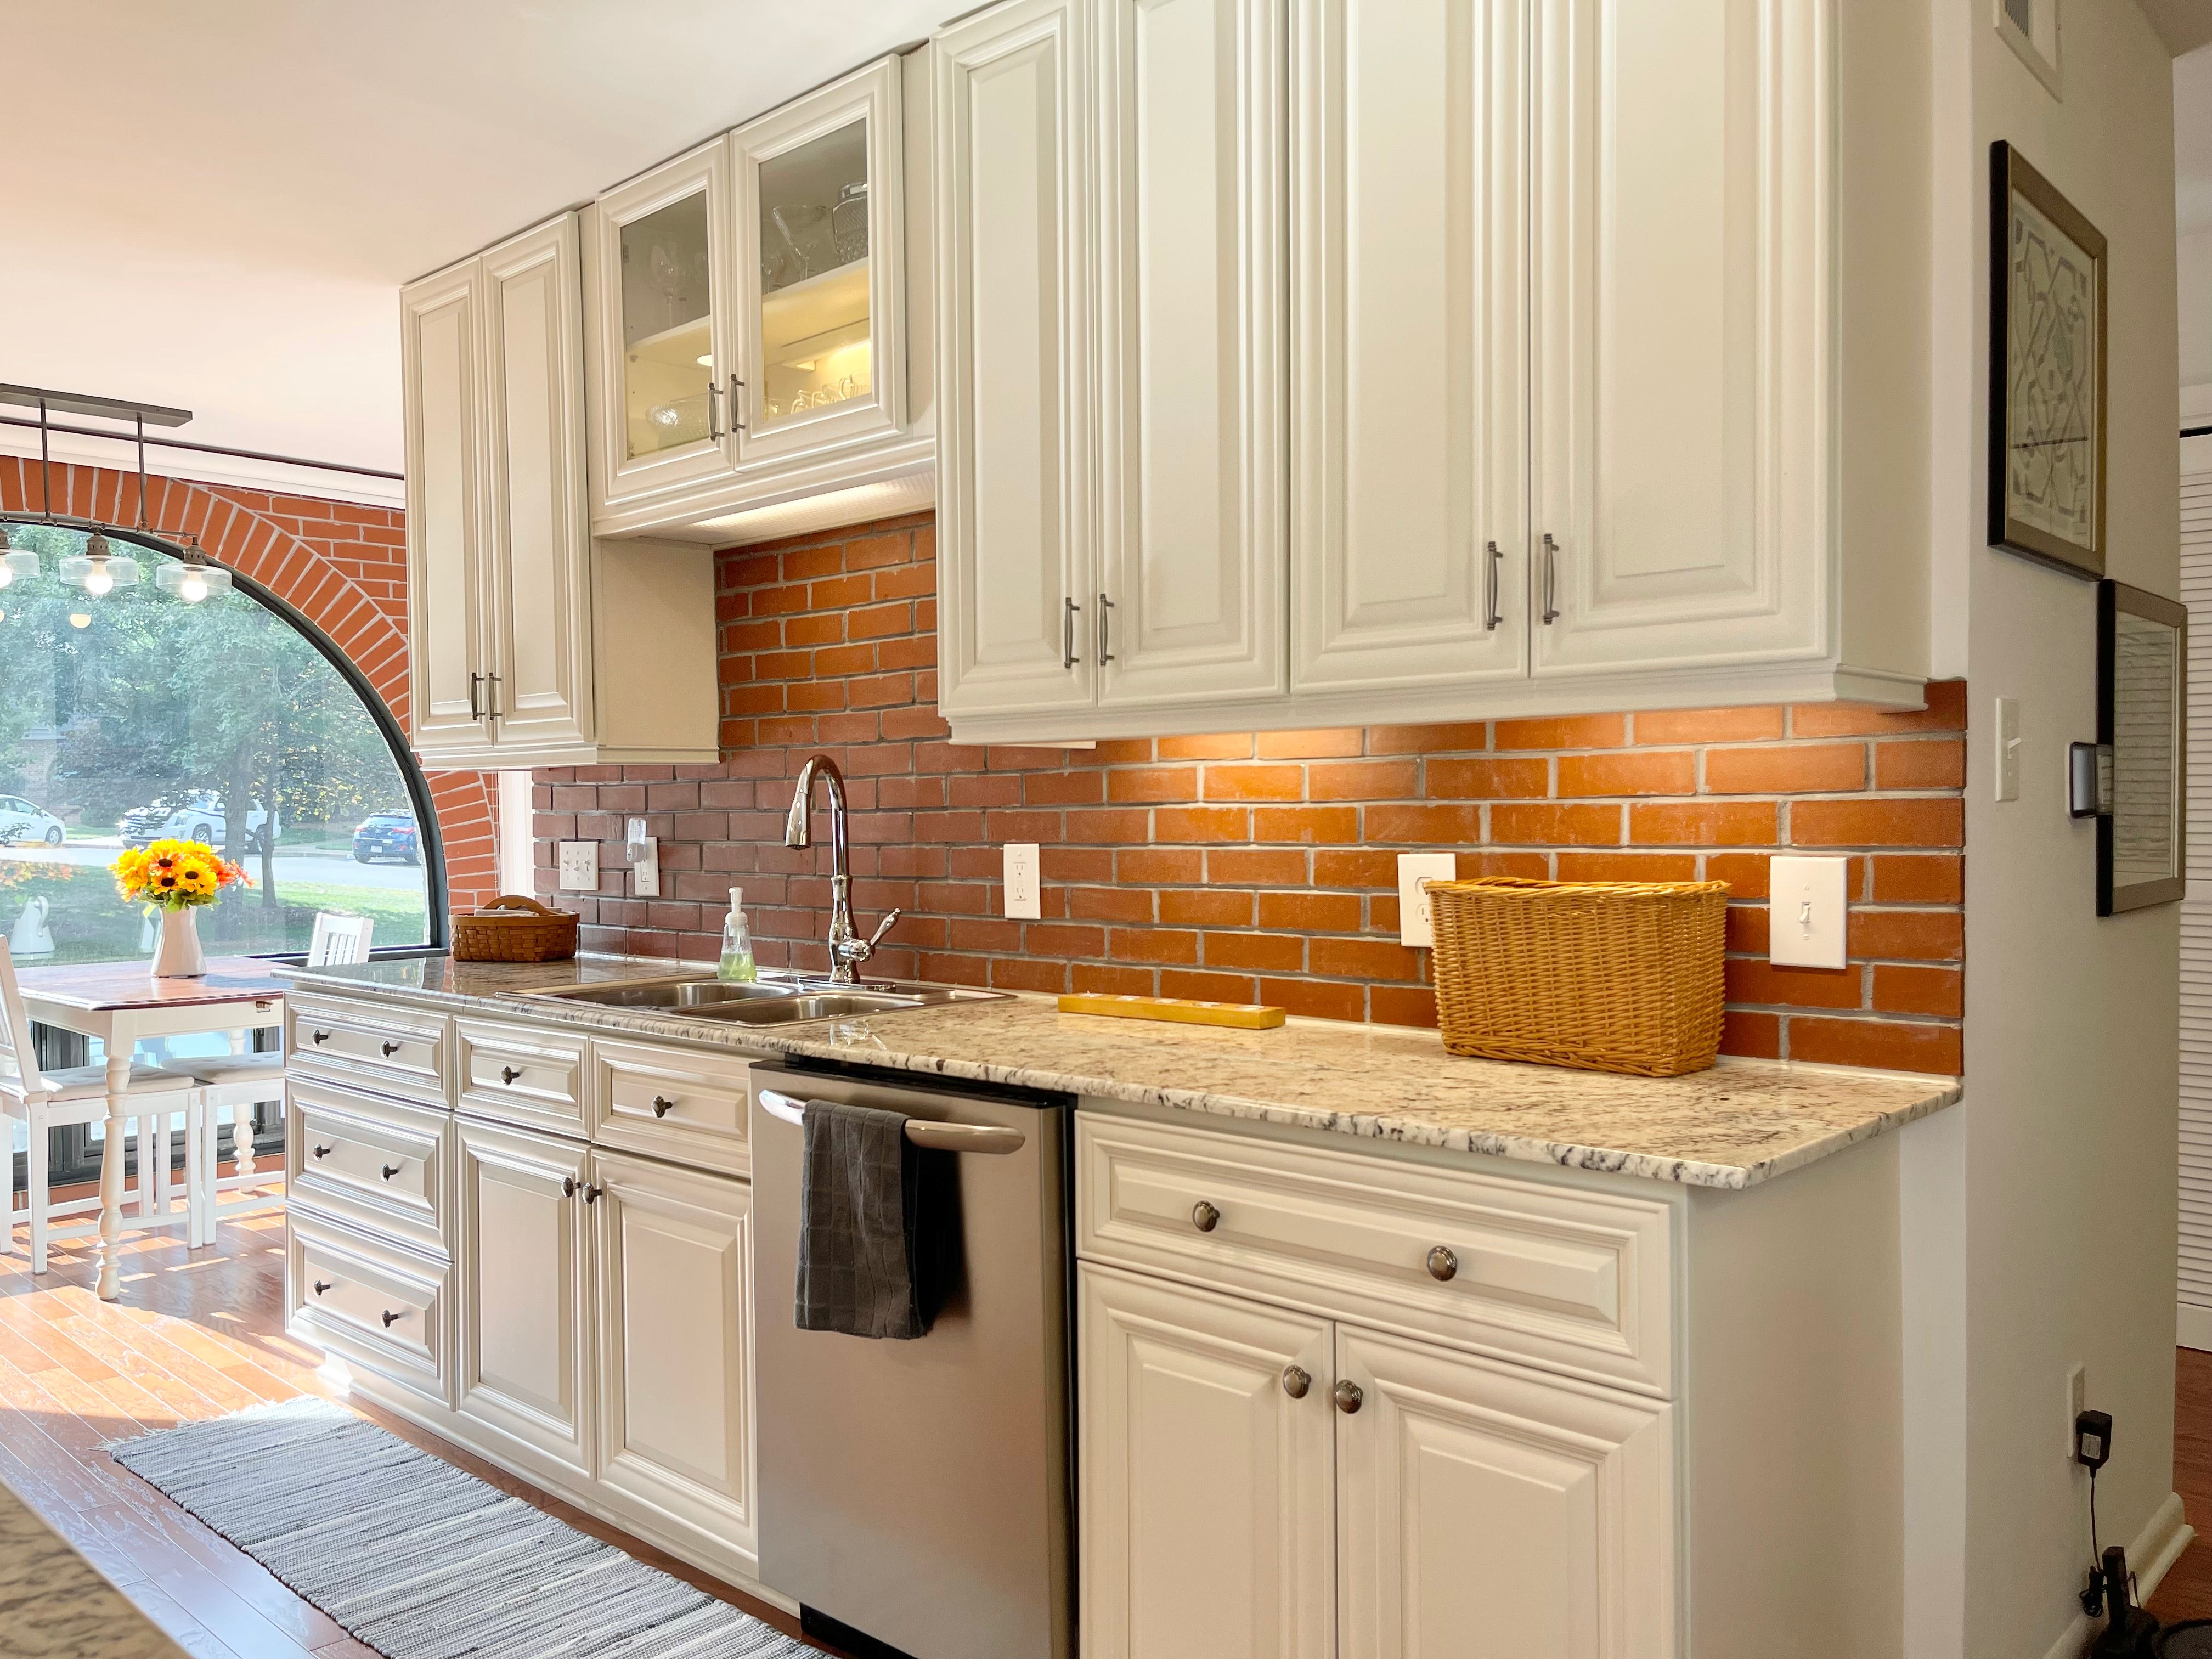 A Step-by-Step Guide to Planning Your Dream Kitchen Remodel with L&C Cabinetry